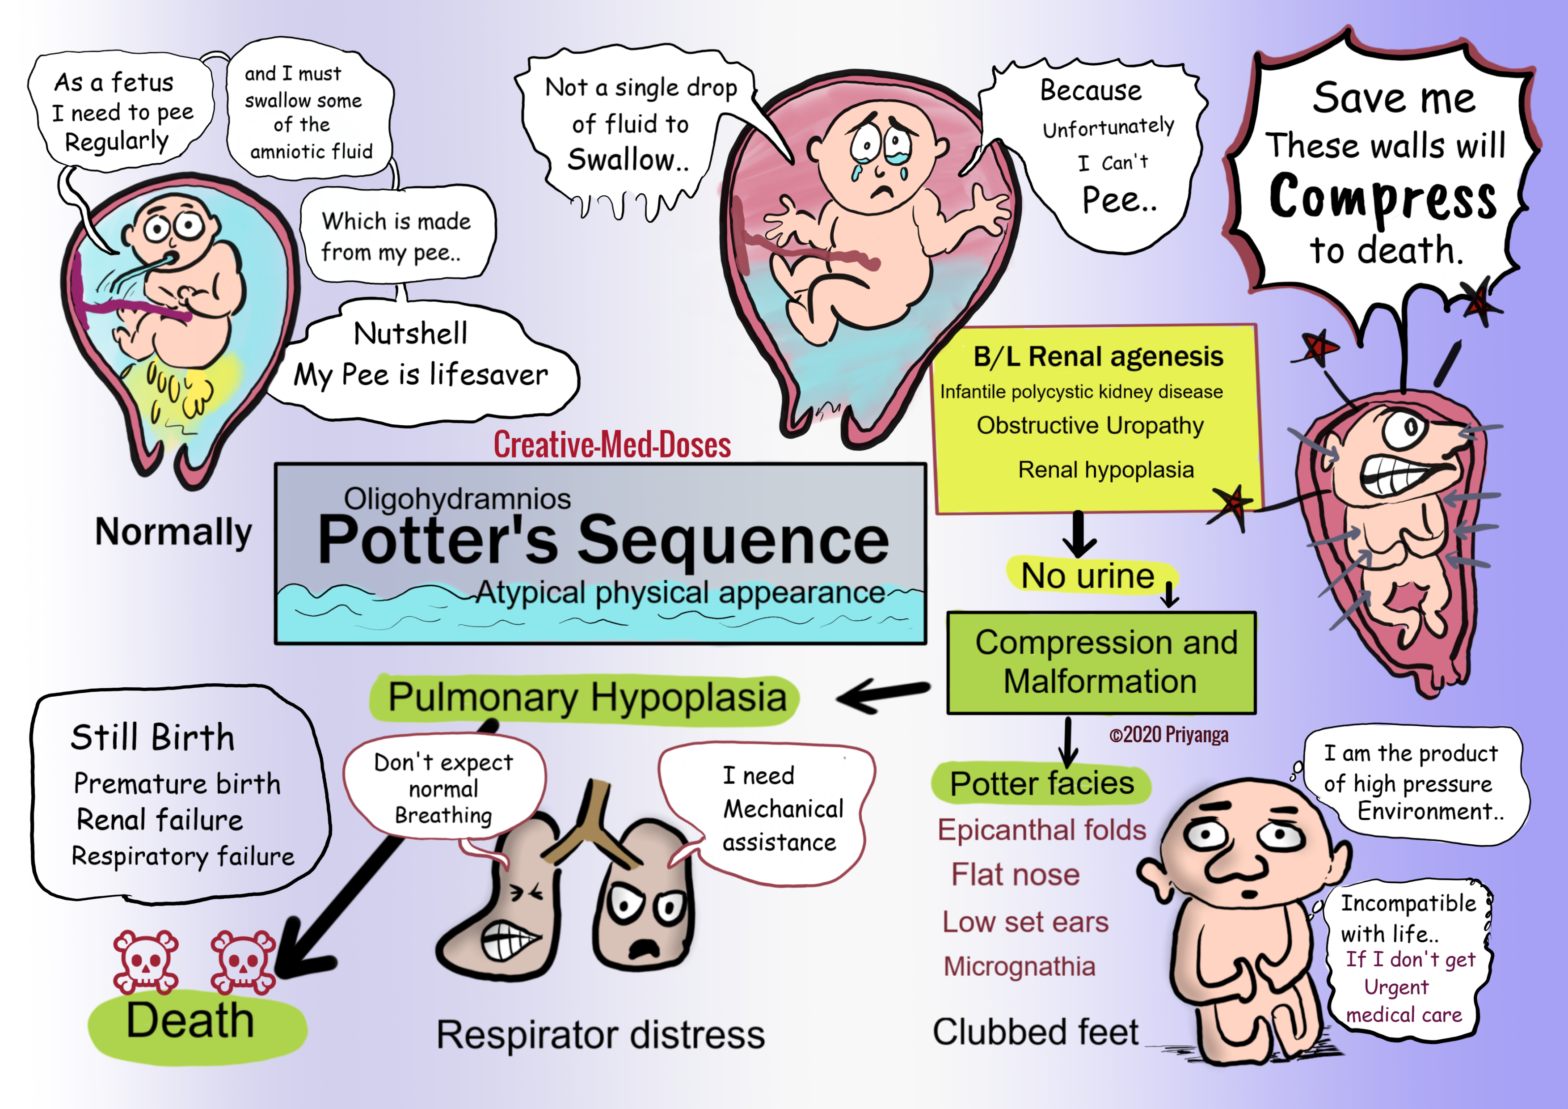 Potter's sequence